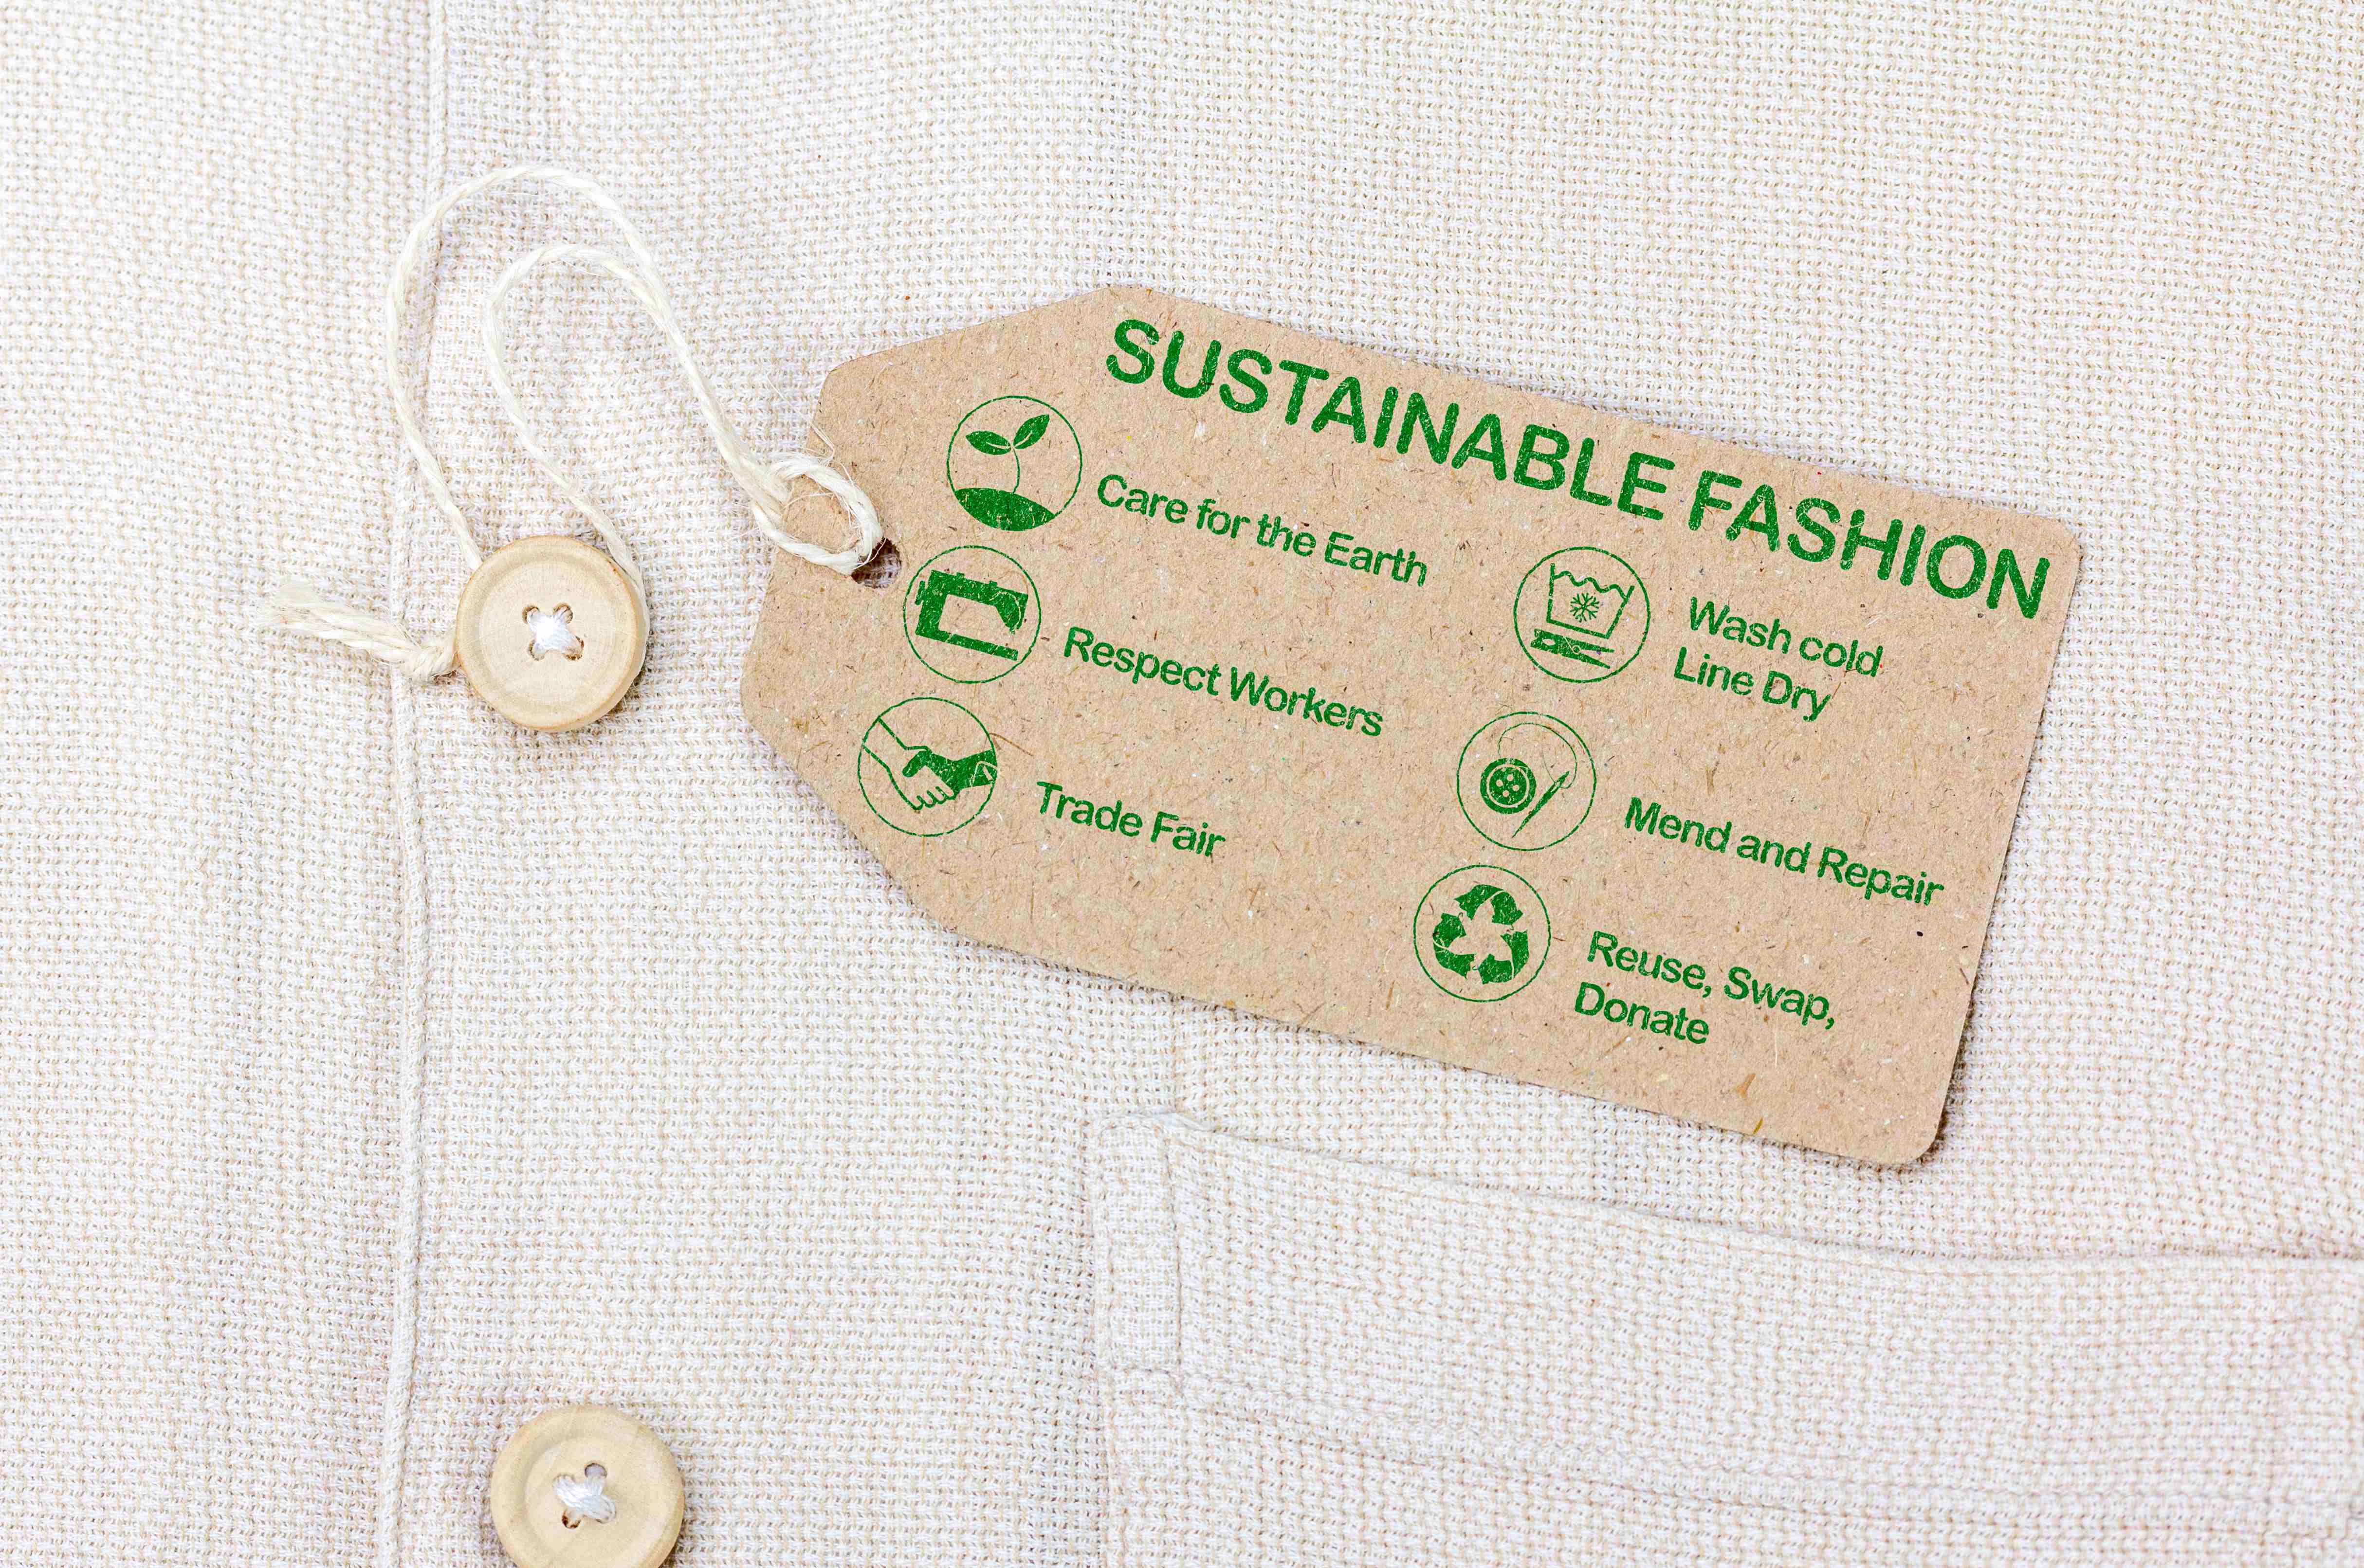 Sustainable Practices to Drive Fashion's Sustainability